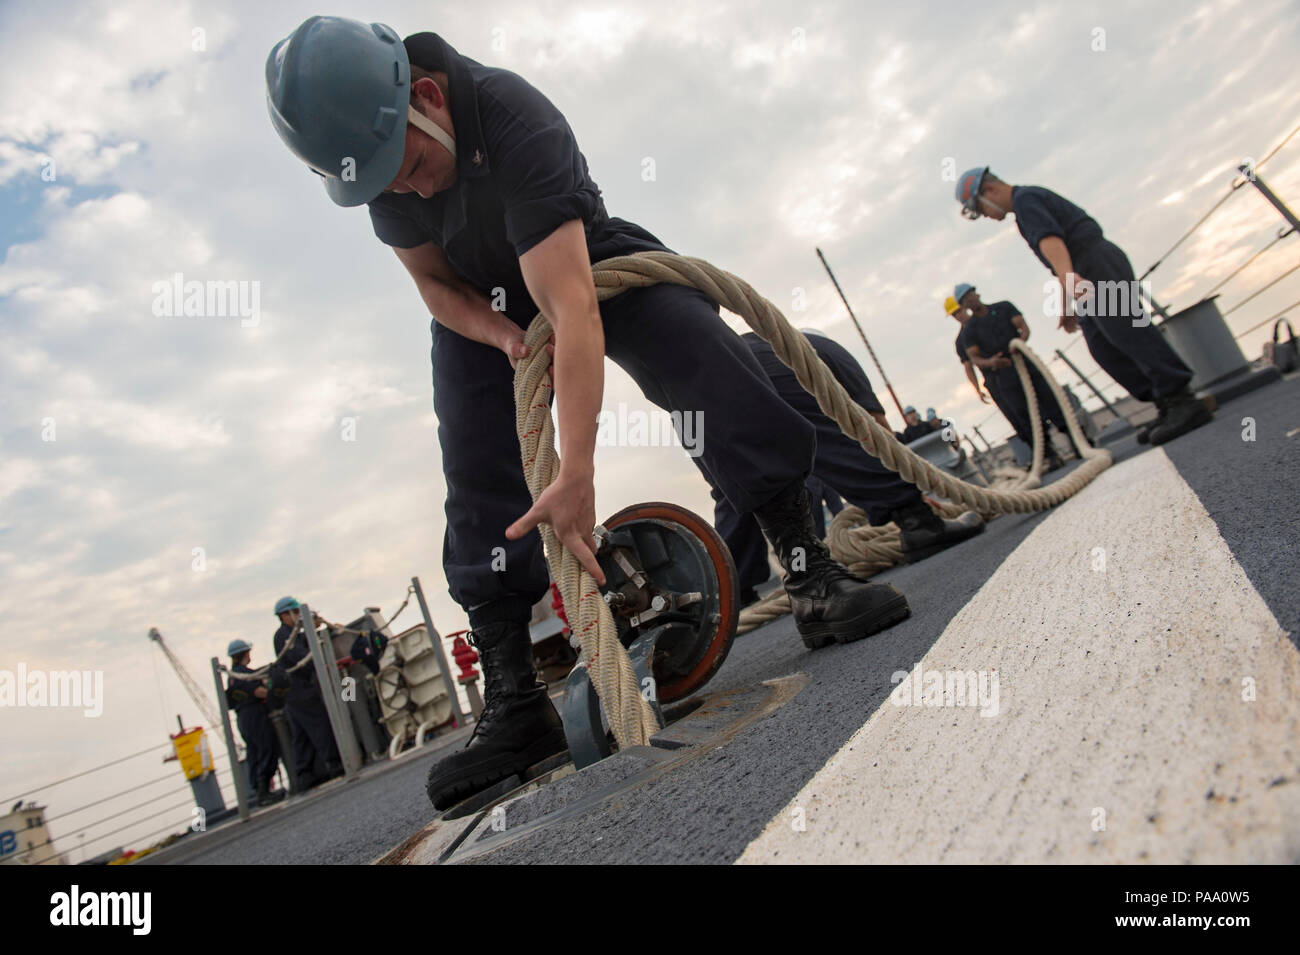 160304-N-MD297-012 PUERTO QUETZAL, Guatemala (March 4, 2016) - Information Systems Technician 3rd Class Justin Senechal, assigned to the Arleigh Burke-class guided-missile destroyer USS Lassen (DDG 82), prepares for sea and anchor detail as the ship pulls into Puerto Quetzal, Guatemala, for a brief stop for fuel (BSF). Lassen is deployed to the U.S. 4th Fleet area of responsibility supporting law enforcement operations as part of Operation Martillo. (U.S. Navy photo by Mass Communication Specialist 2nd Class Huey D. Younger Jr./Released) Stock Photo